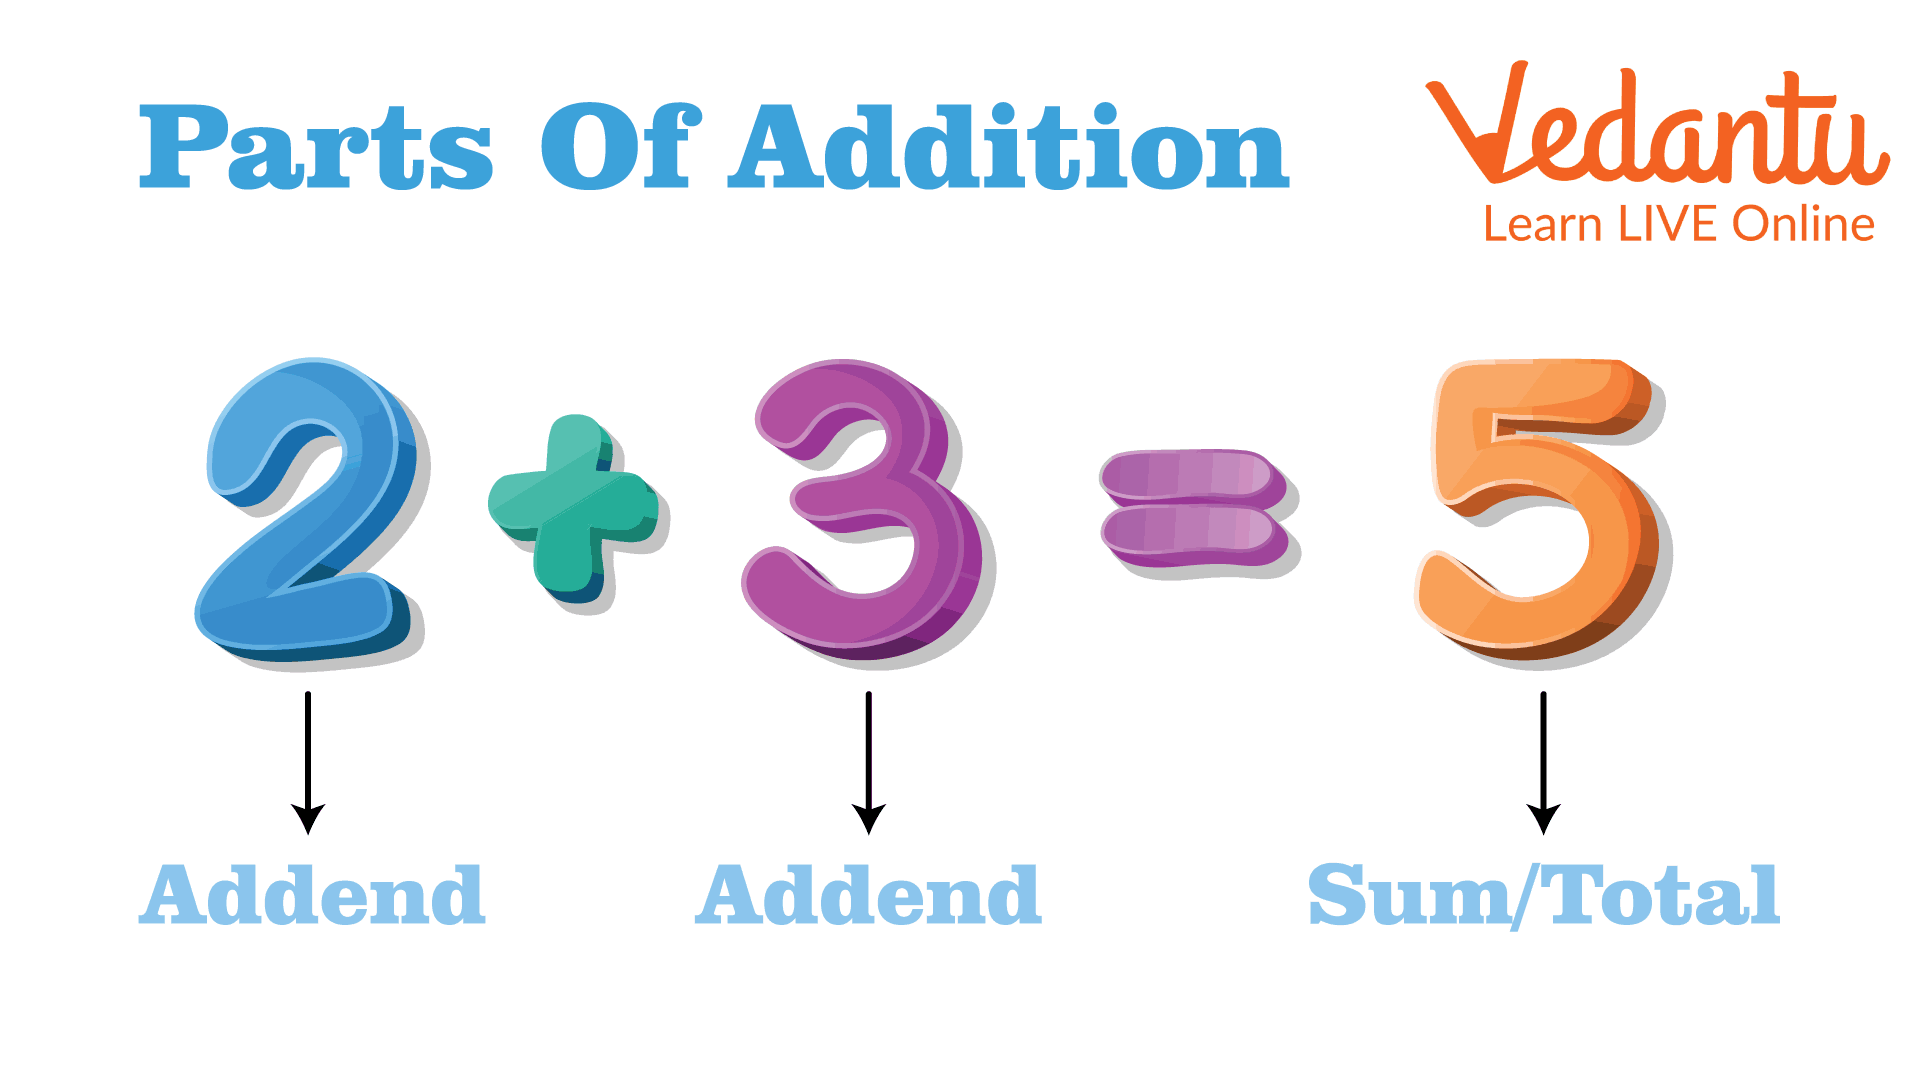 Parts of addition